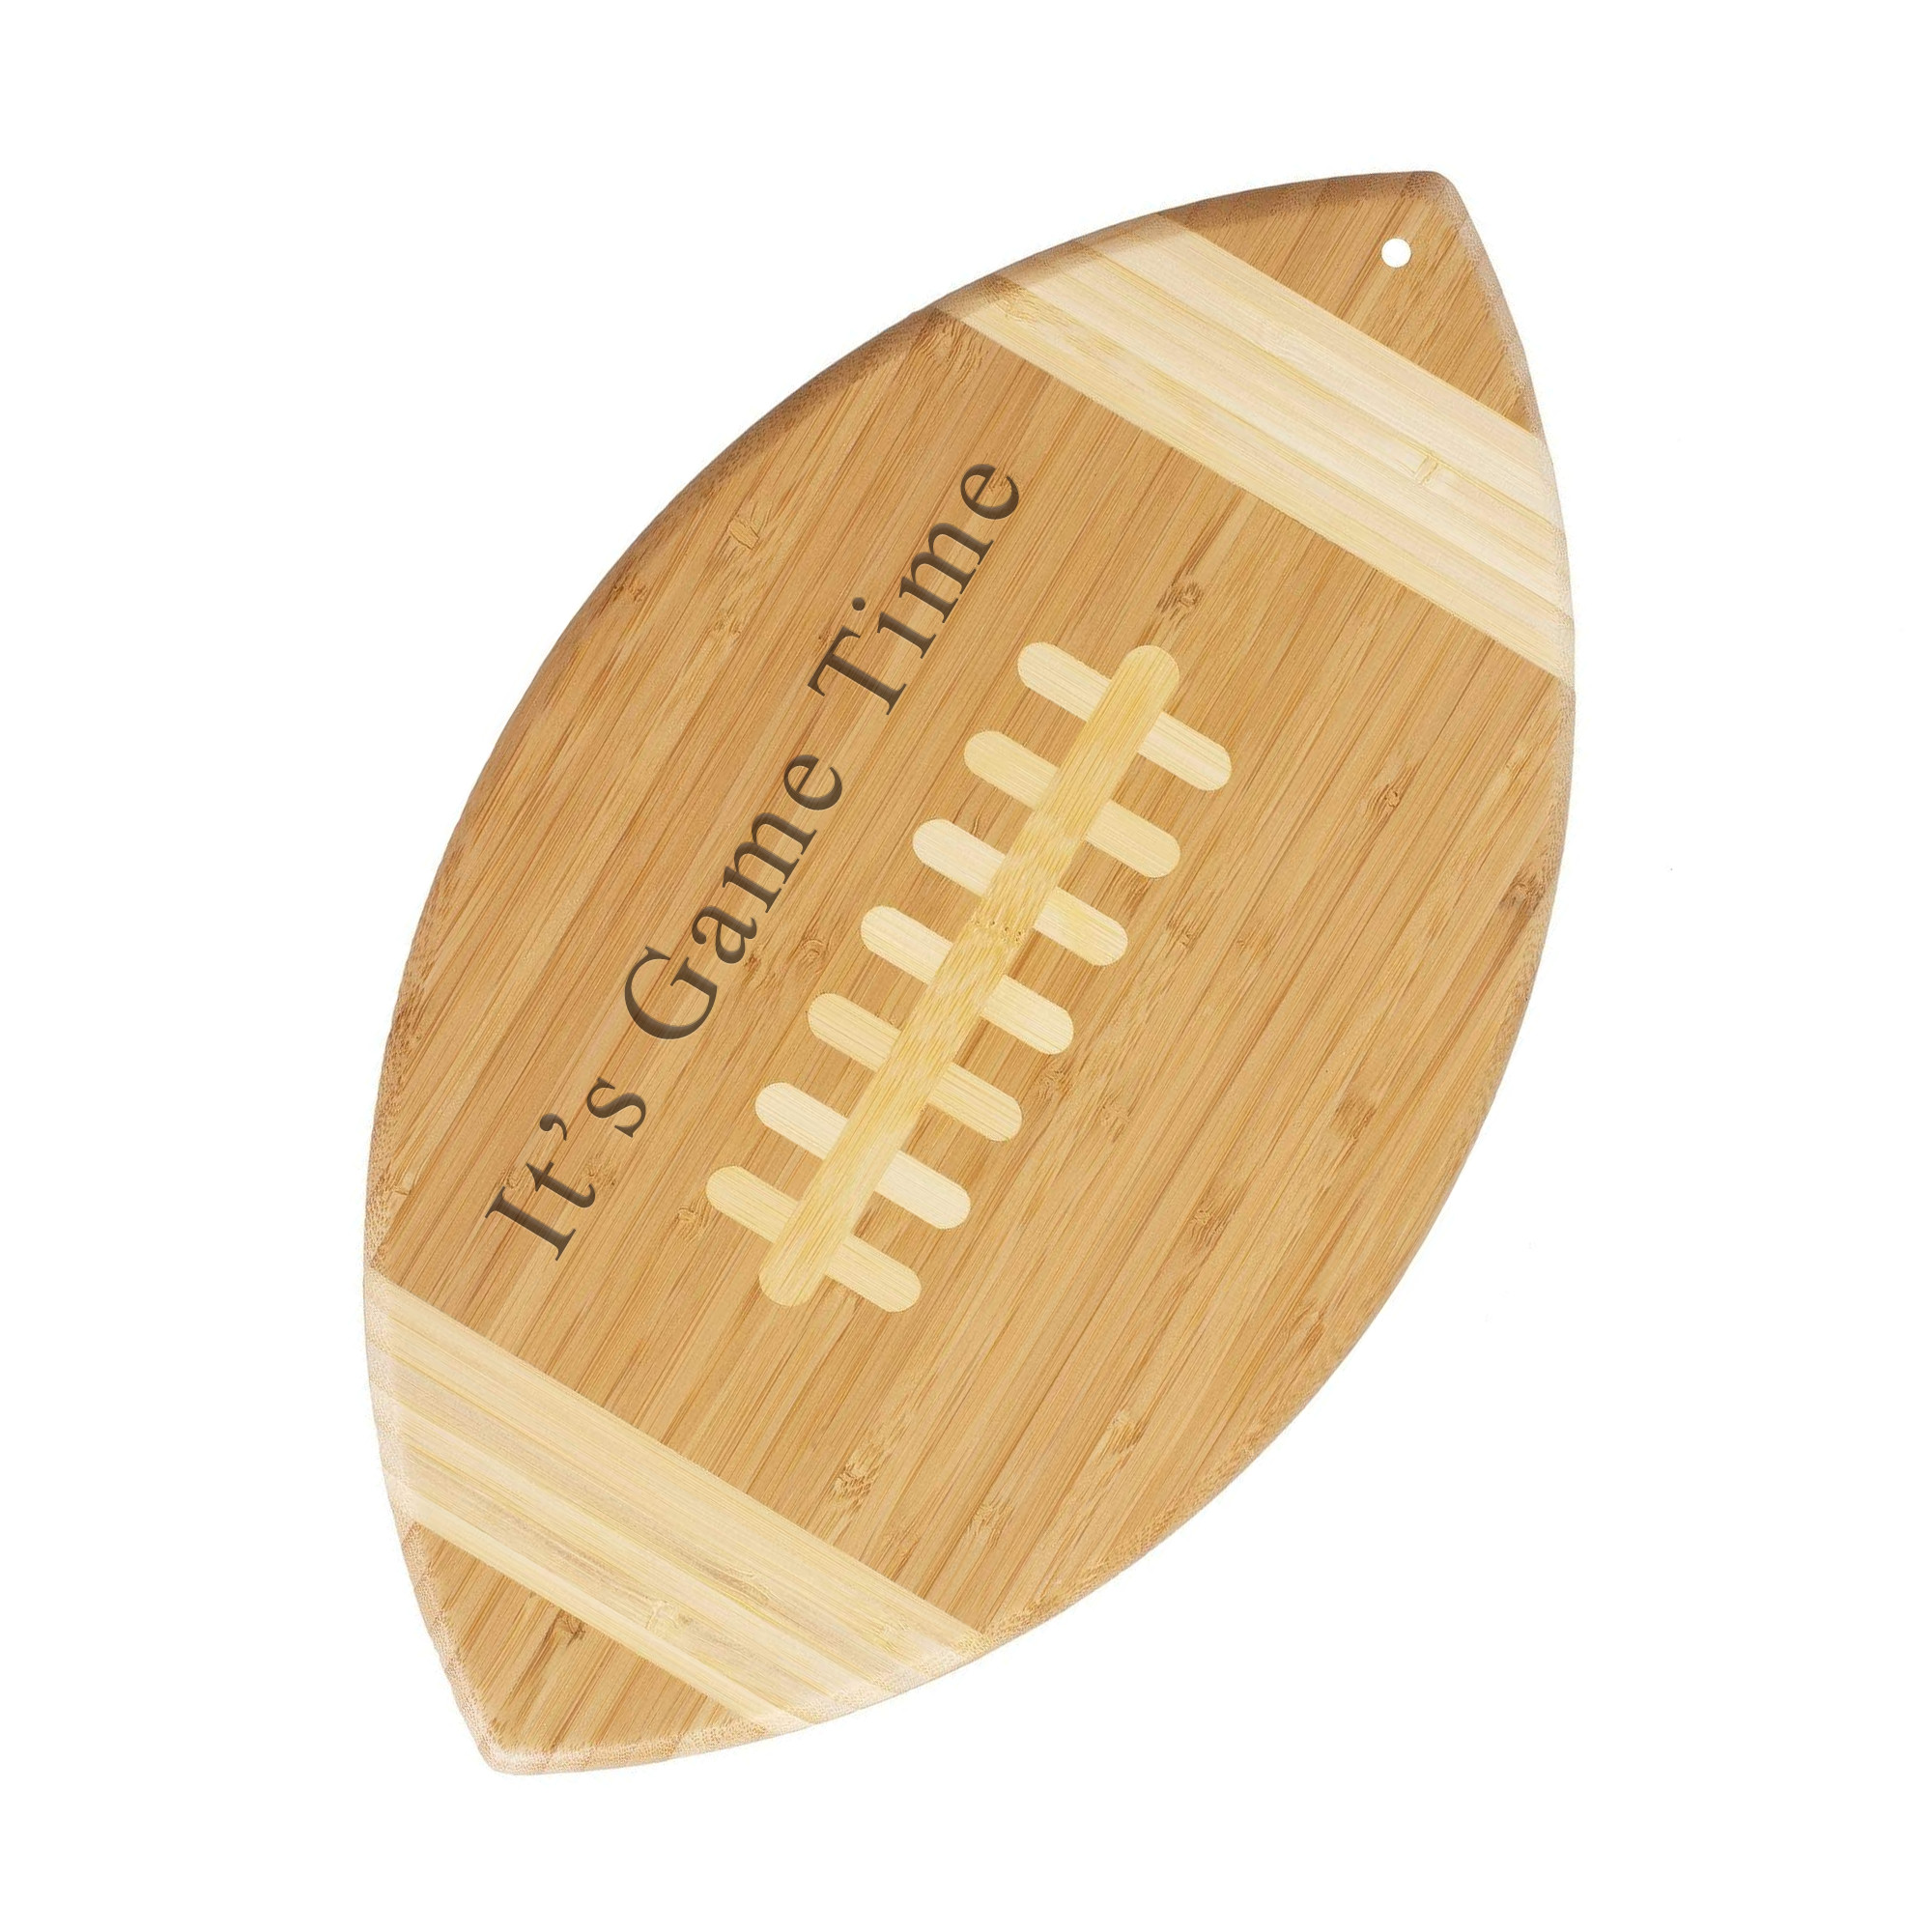 Surfs Up Personalized Bamboo Cutting Board